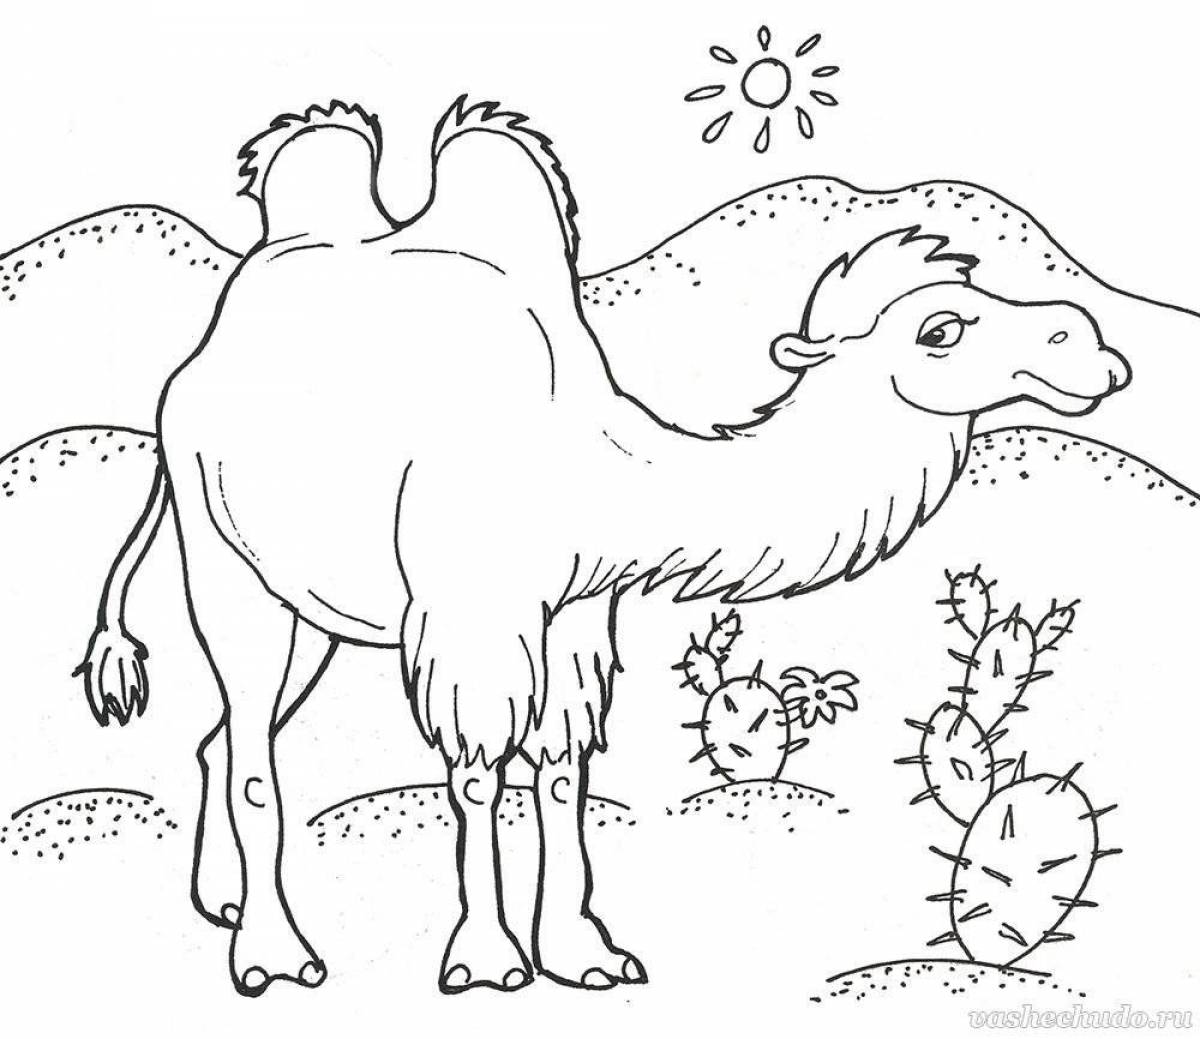 Colour-loving animal coloring pages for children 6-7 years old